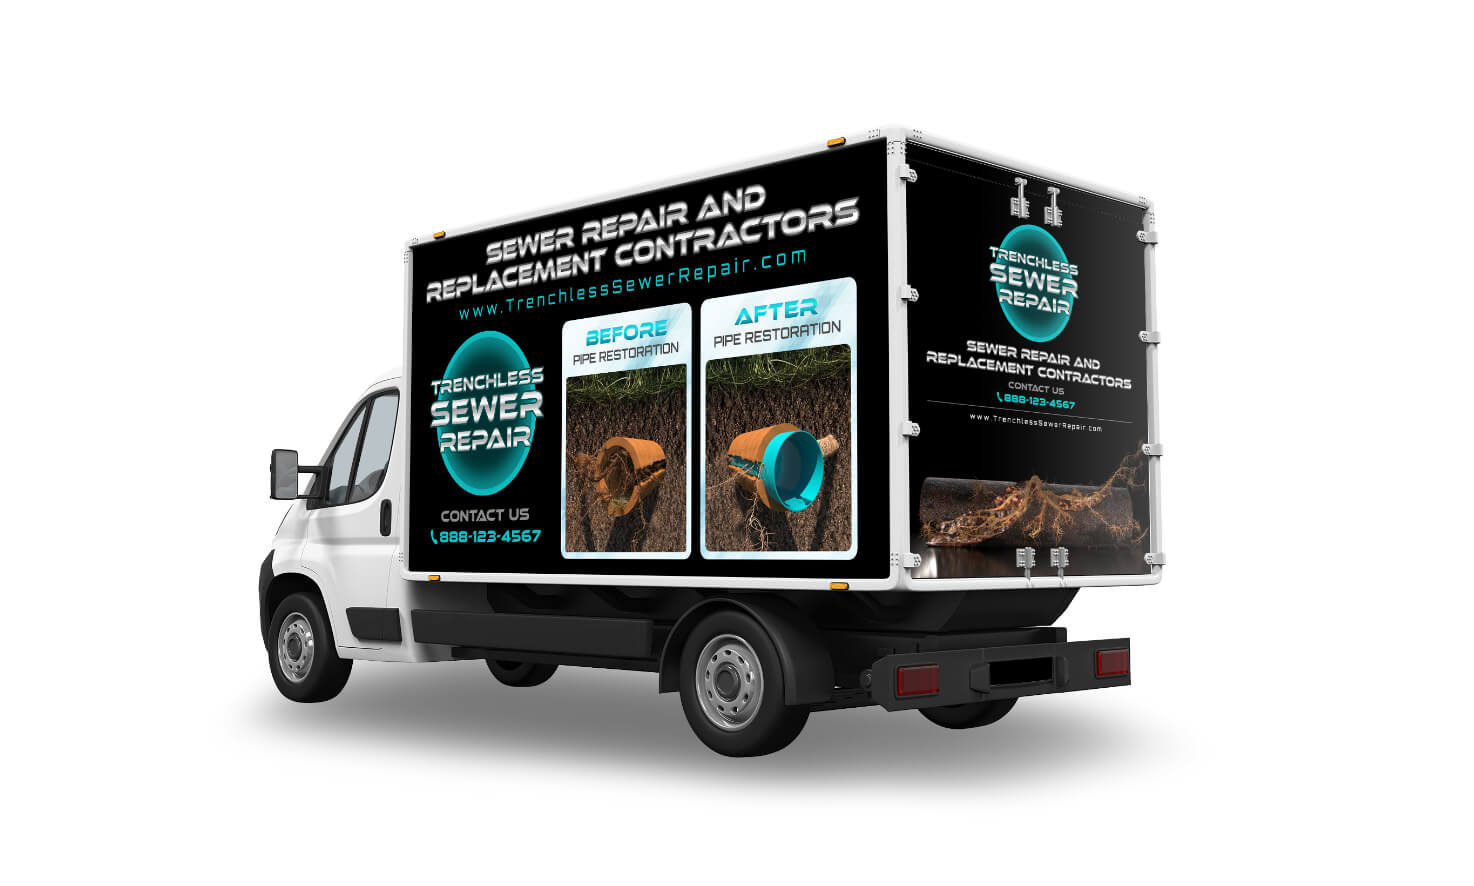 Trenchless Sewer Repair Vehicle Wraps